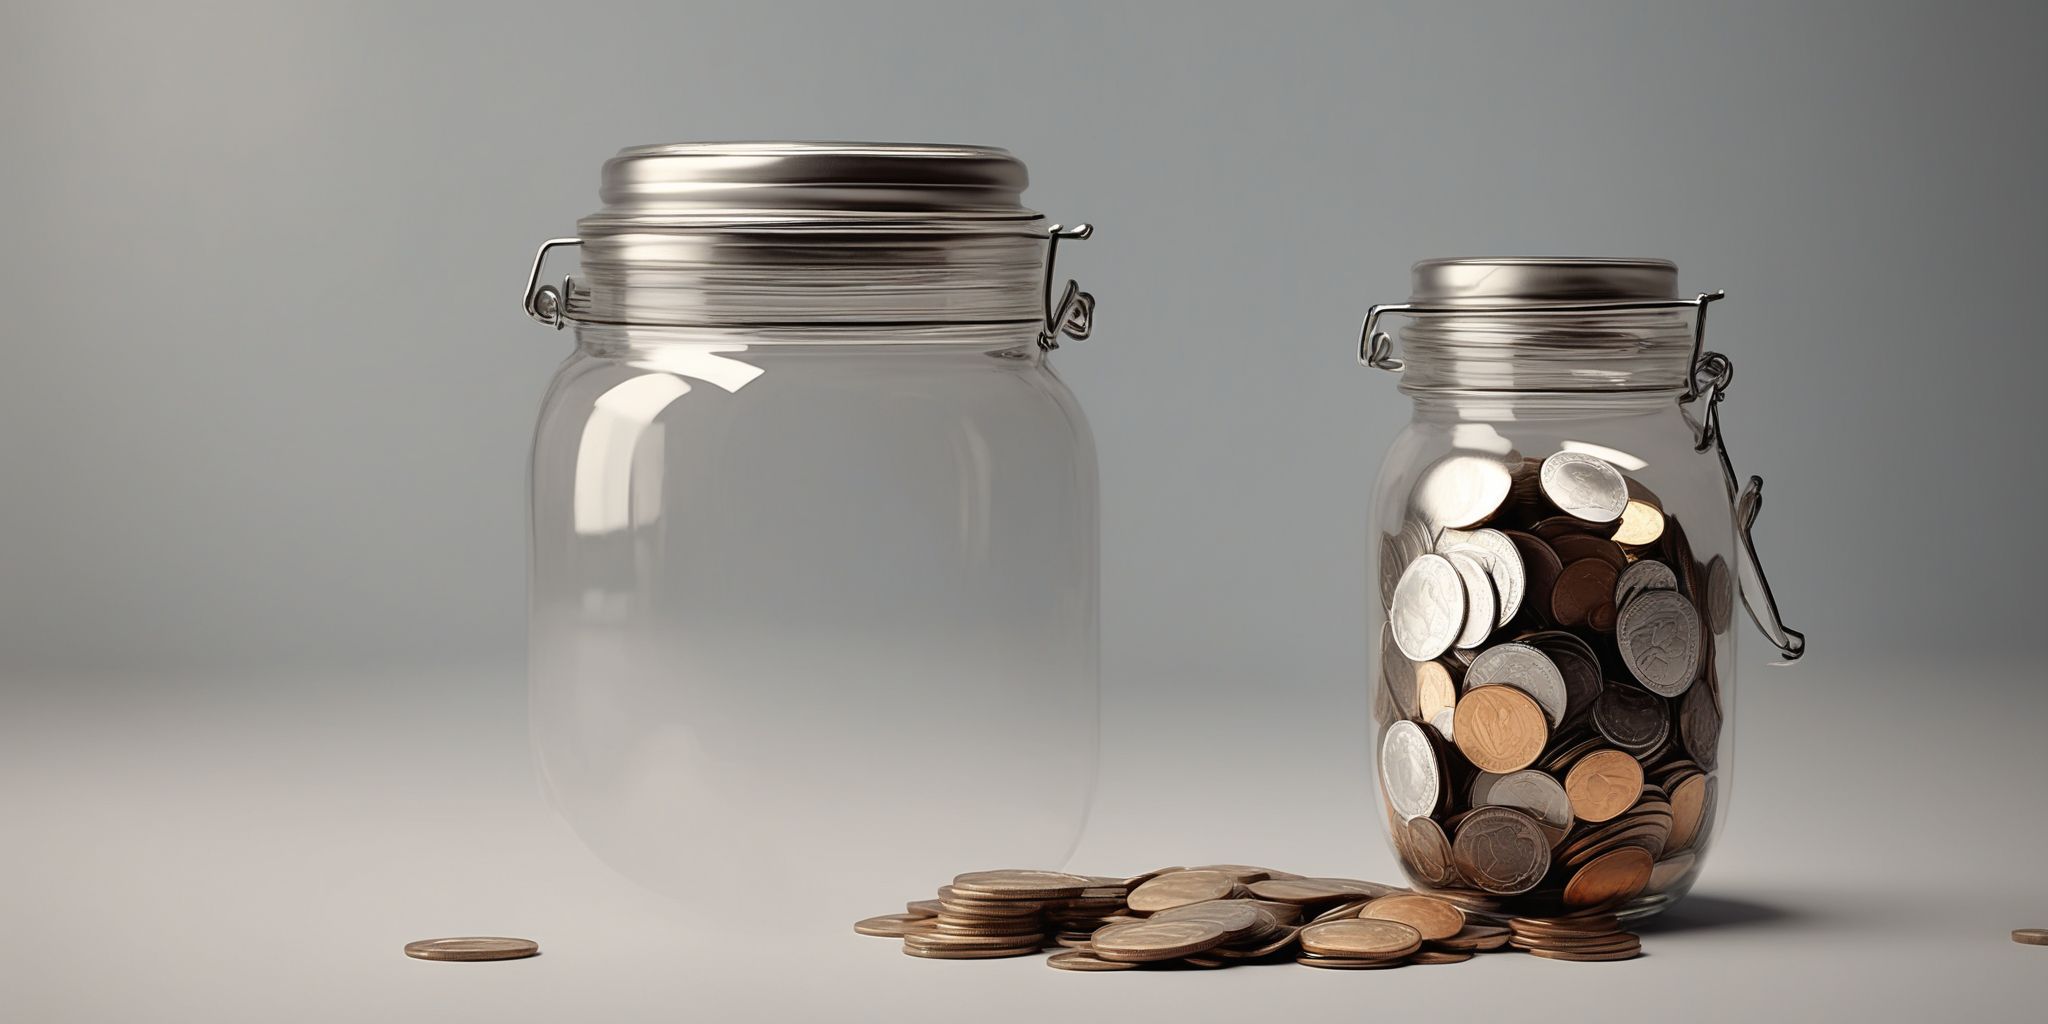 Coin jar  in realistic, photographic style